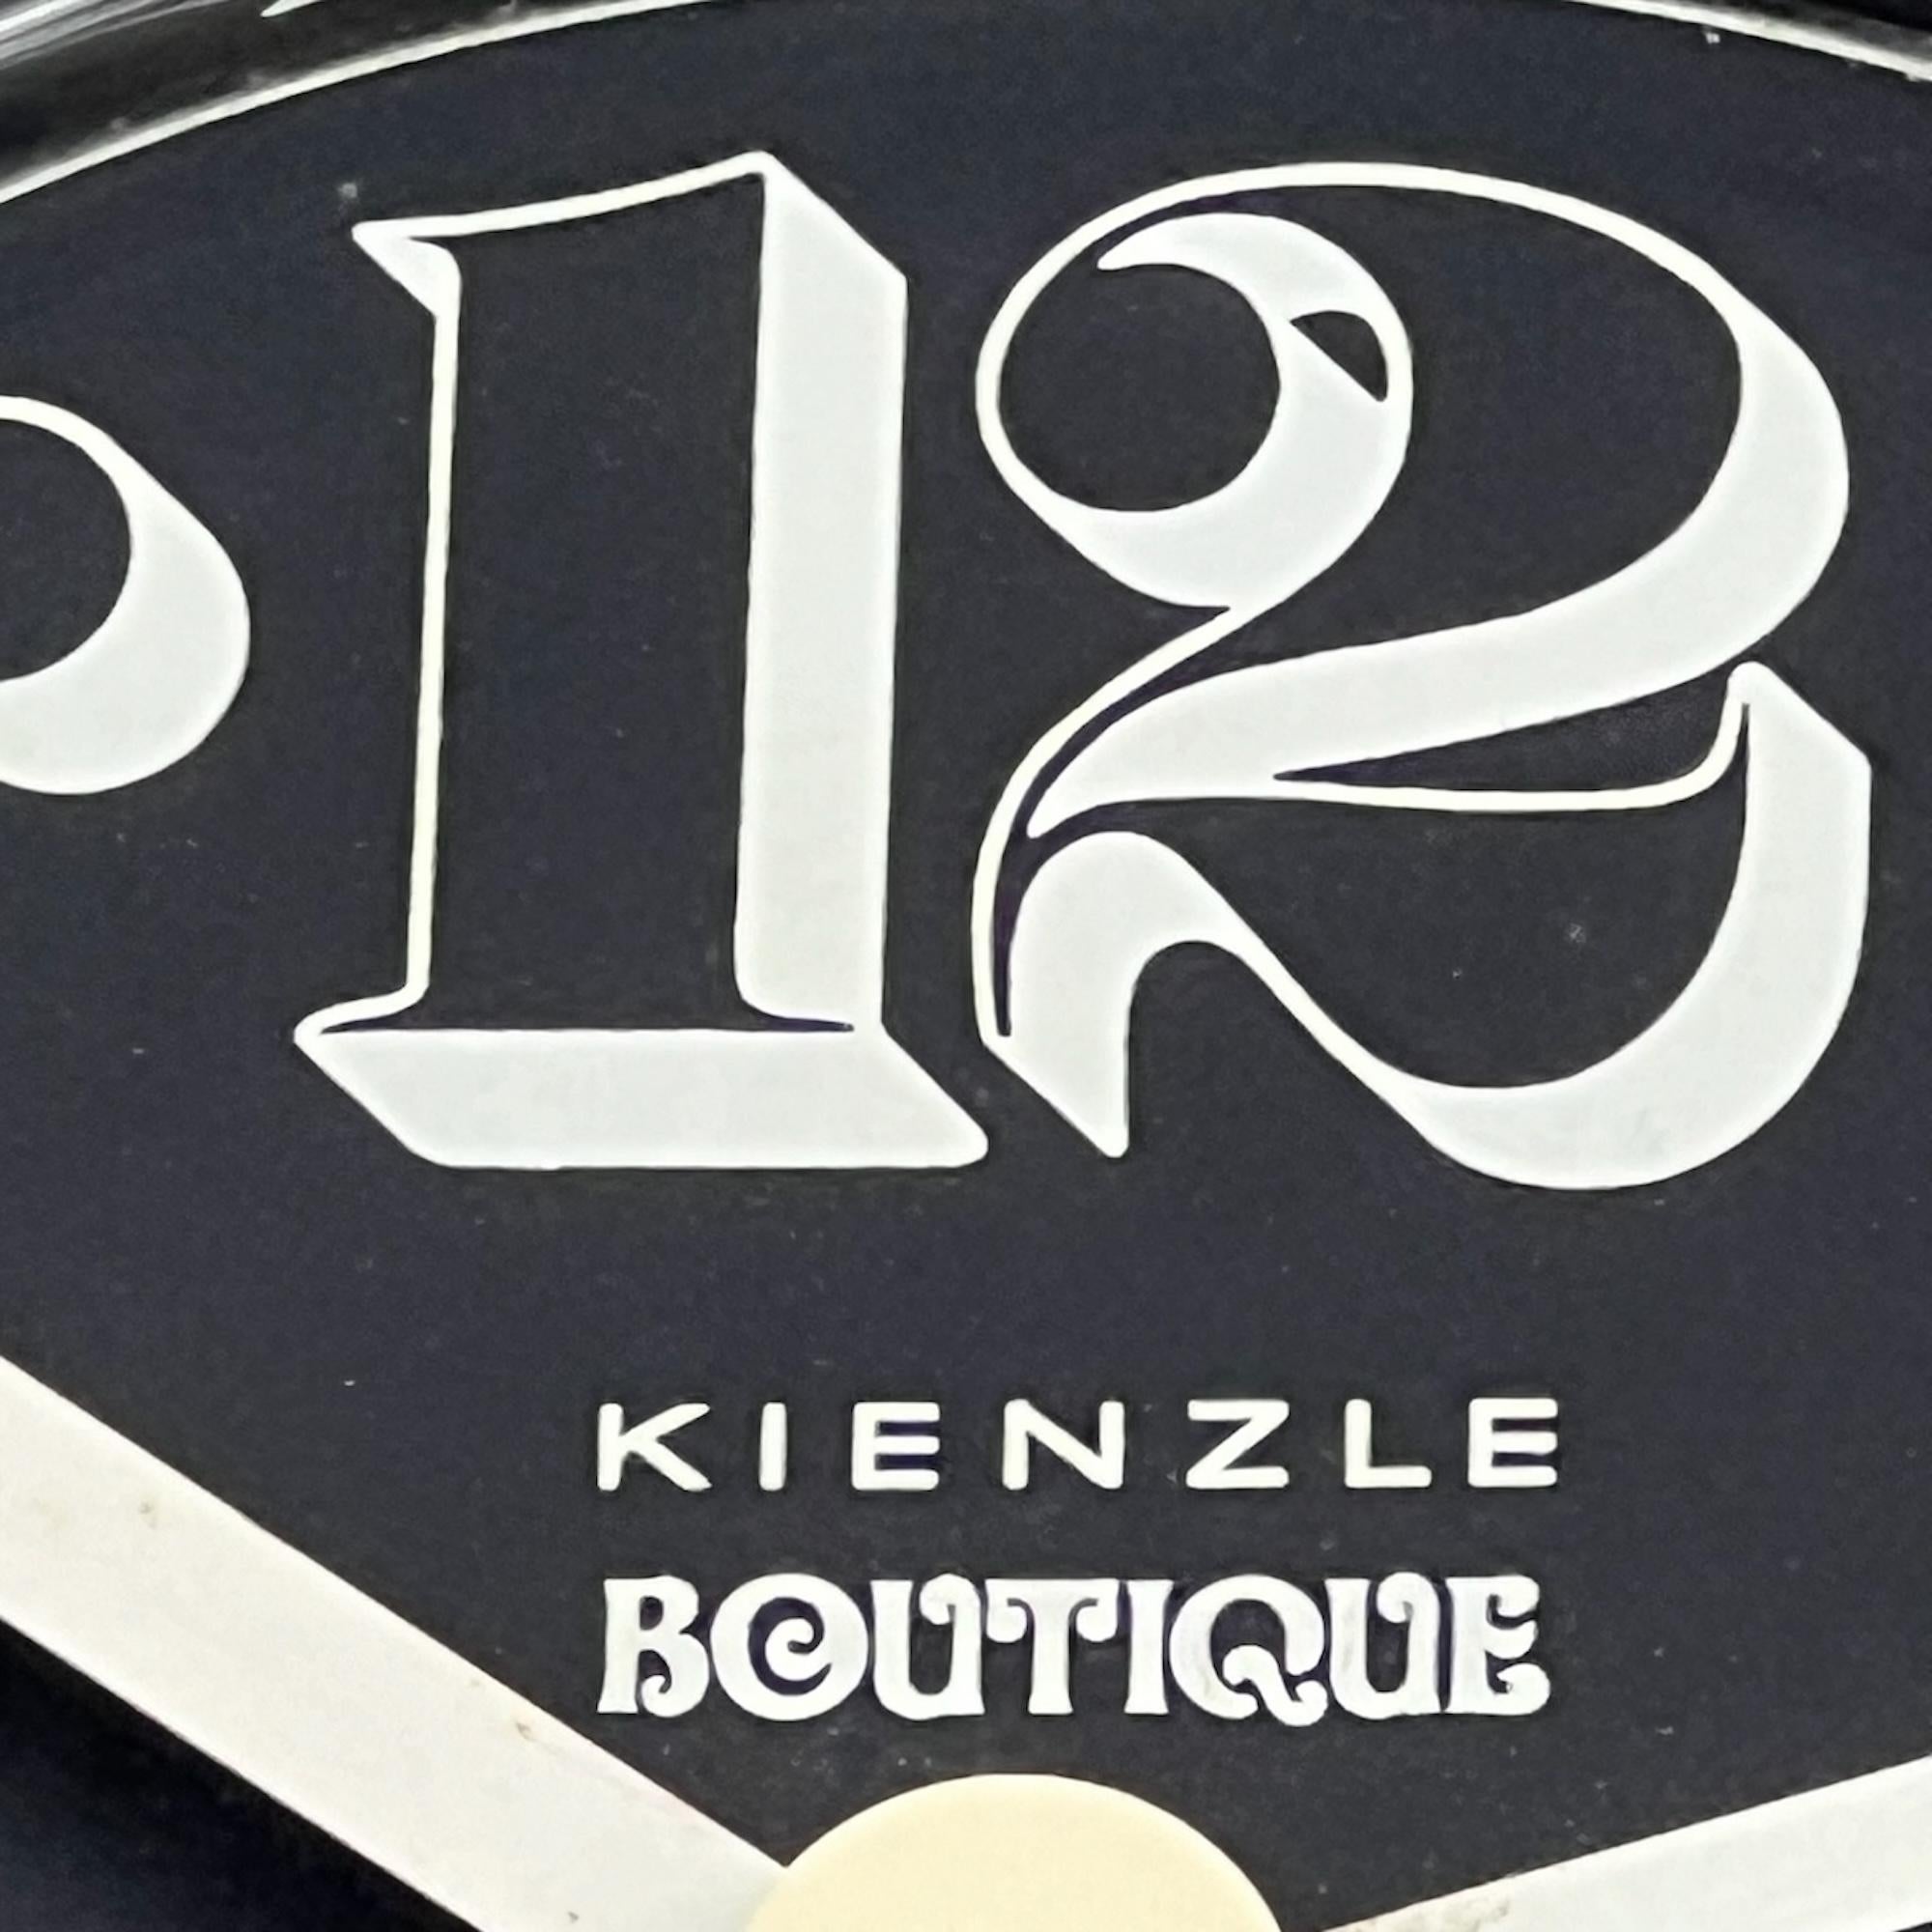 Kienzle 'Boutique' Space Age Wall Clock - Iconic 1970s Design West Germany  4